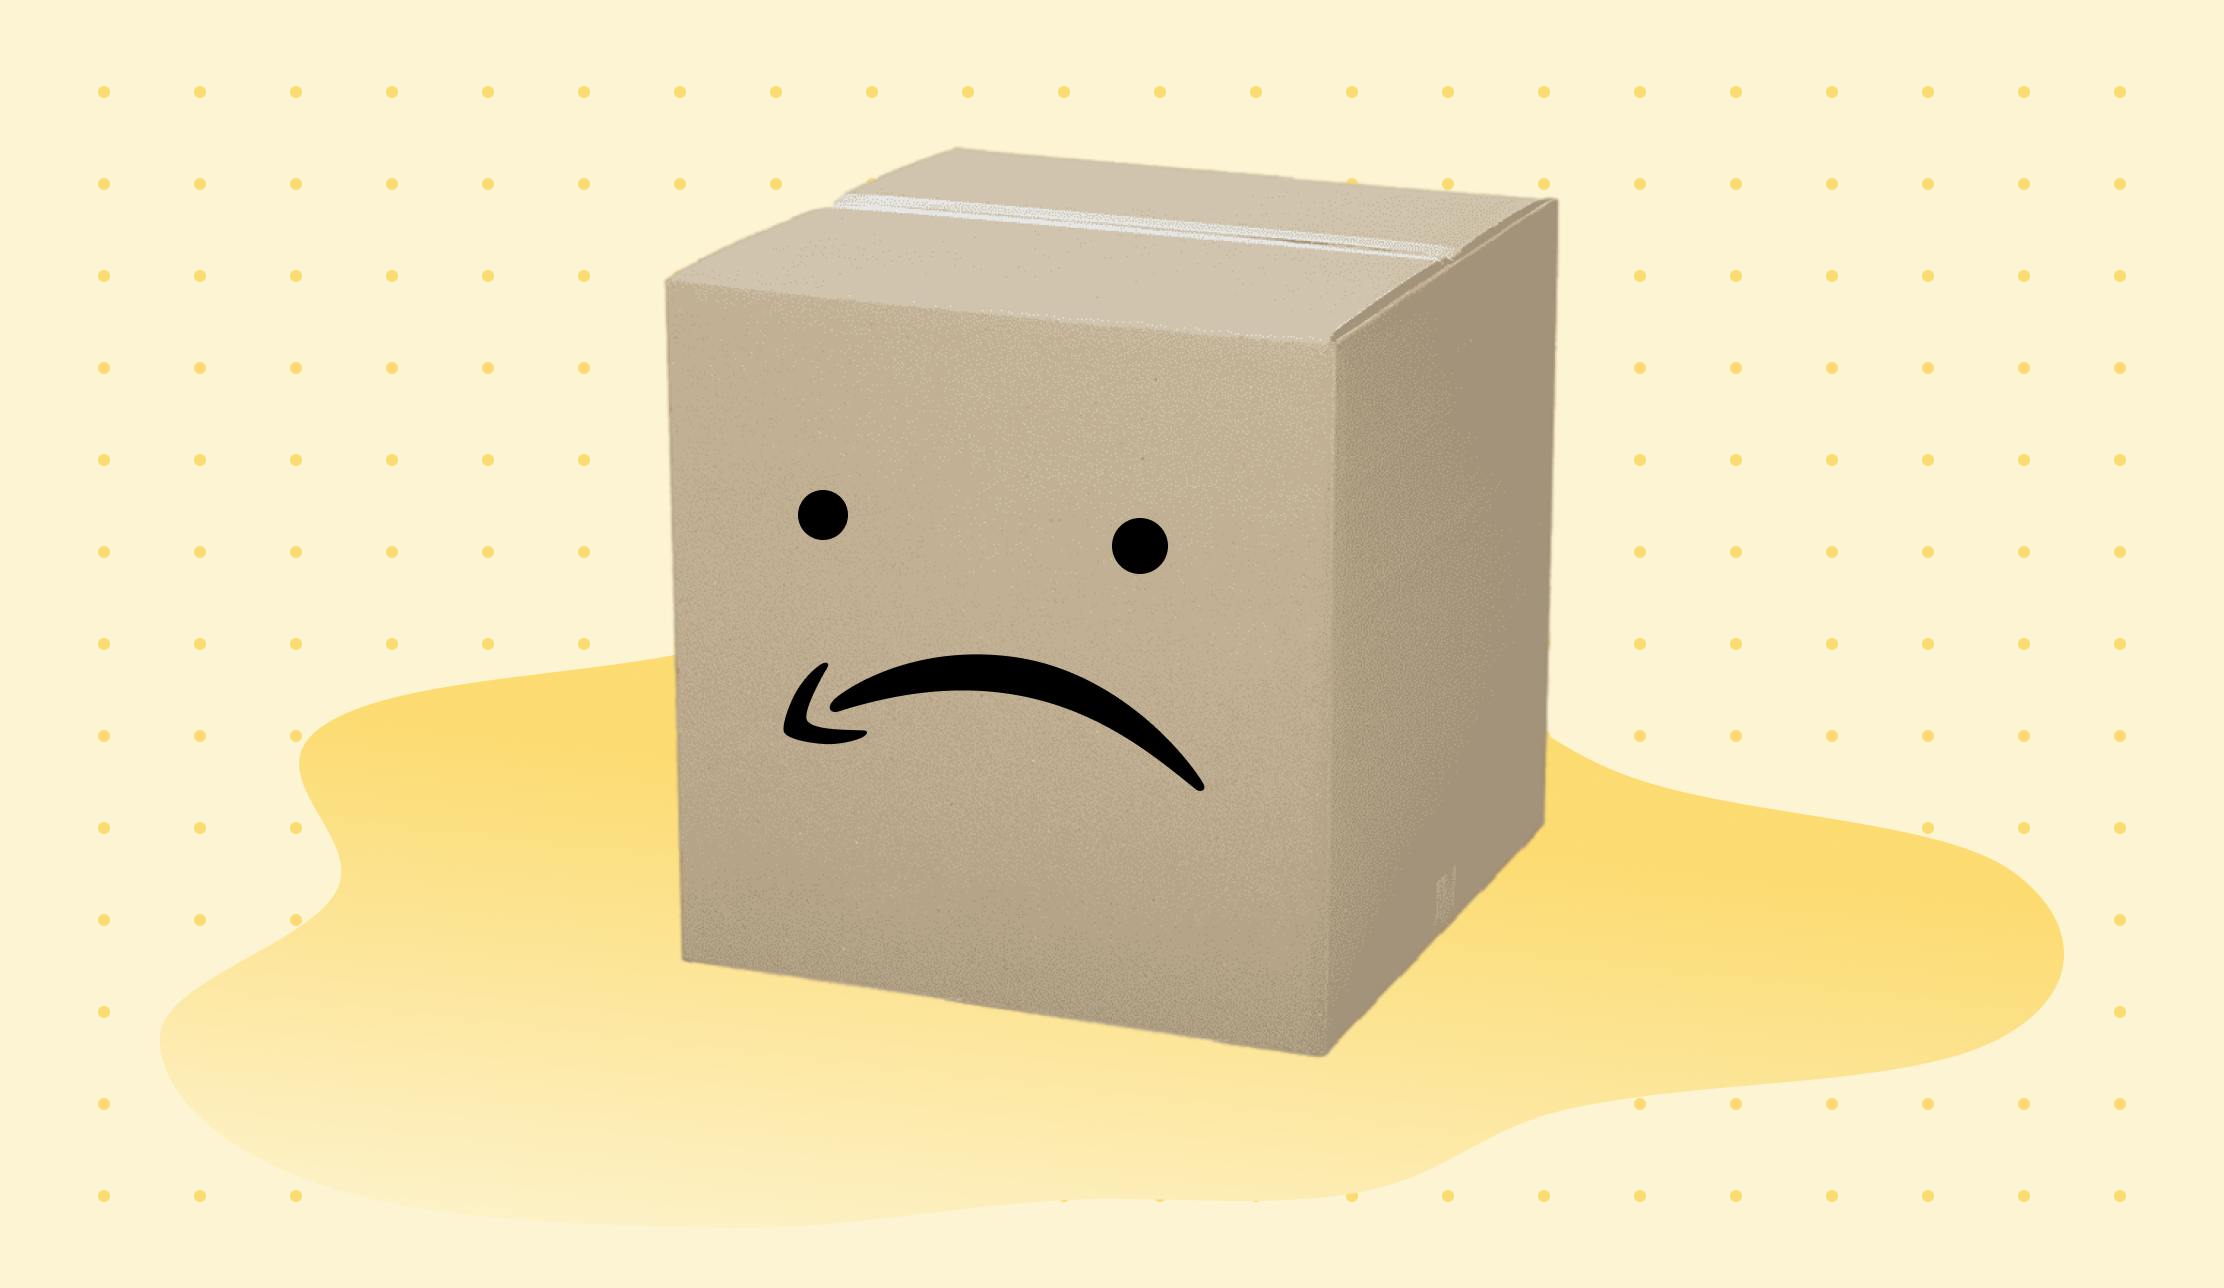 Shipping damage: Delivery package box with a sad face using the Amazon smile logo